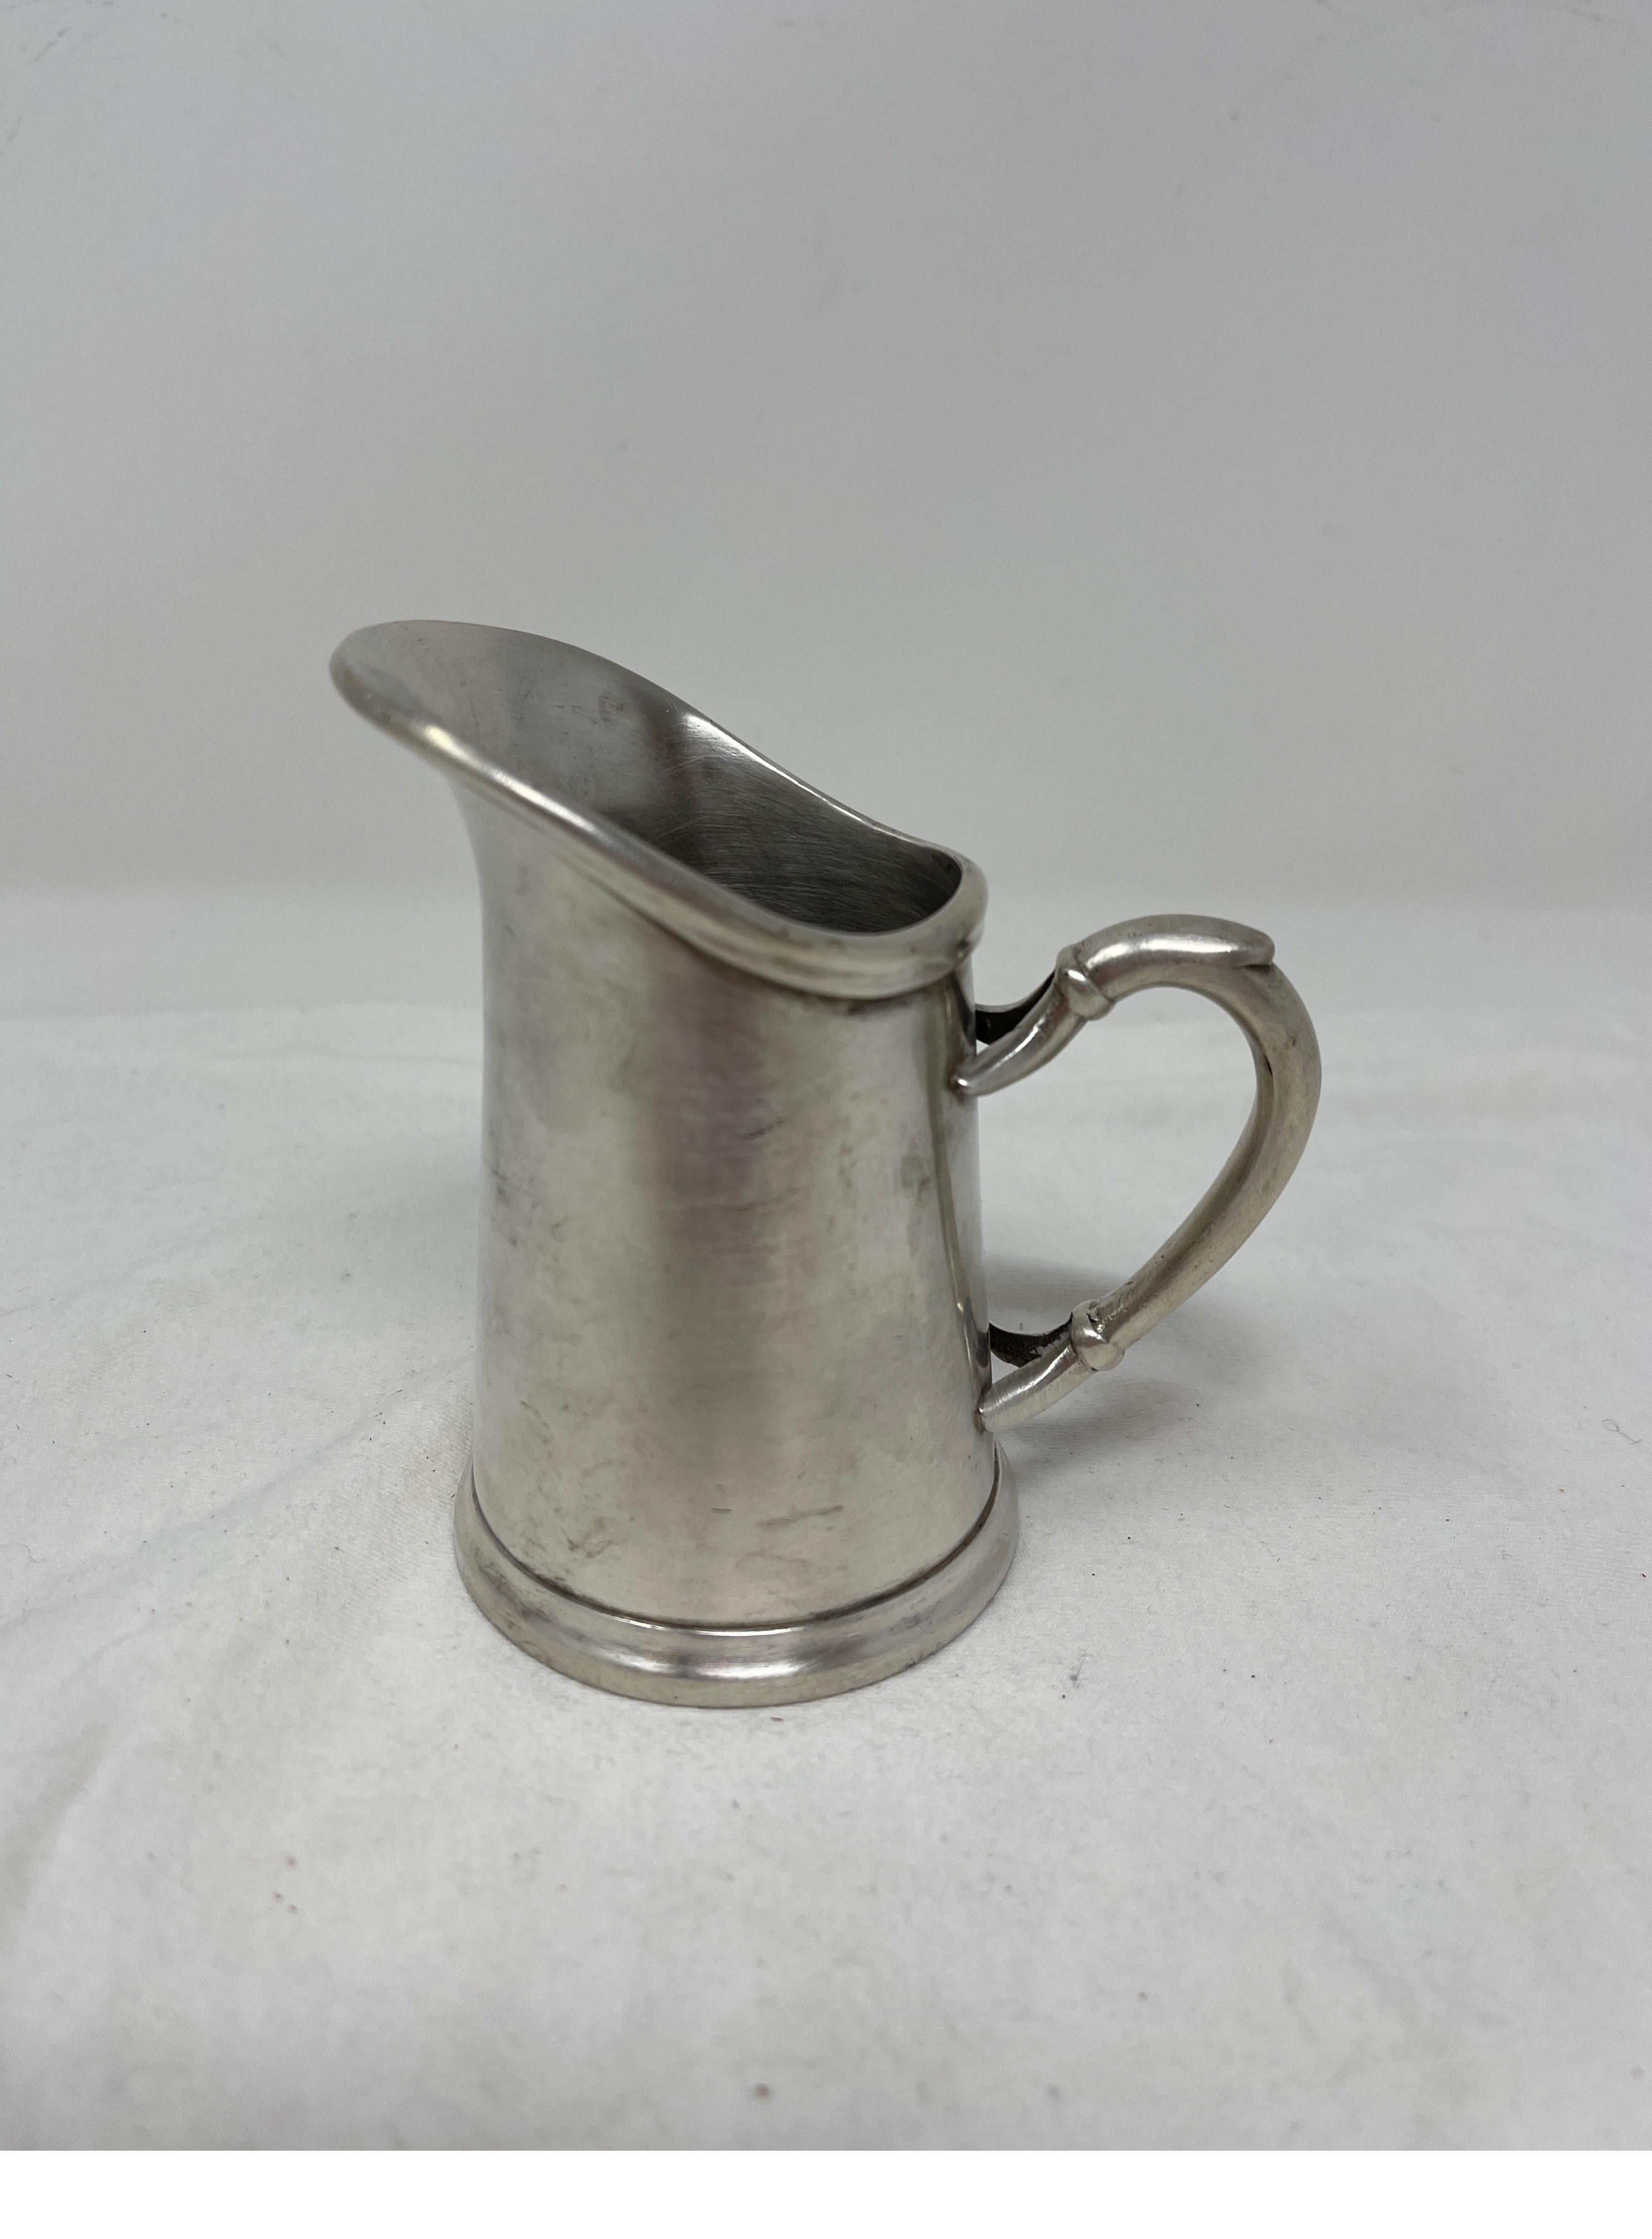 Enjoy your coffee or tea with this adorable little 19th century Hotel Silver creamer. Elevate your morning routine or use this pitcher to old pens, pencils or a fresh cut flower.